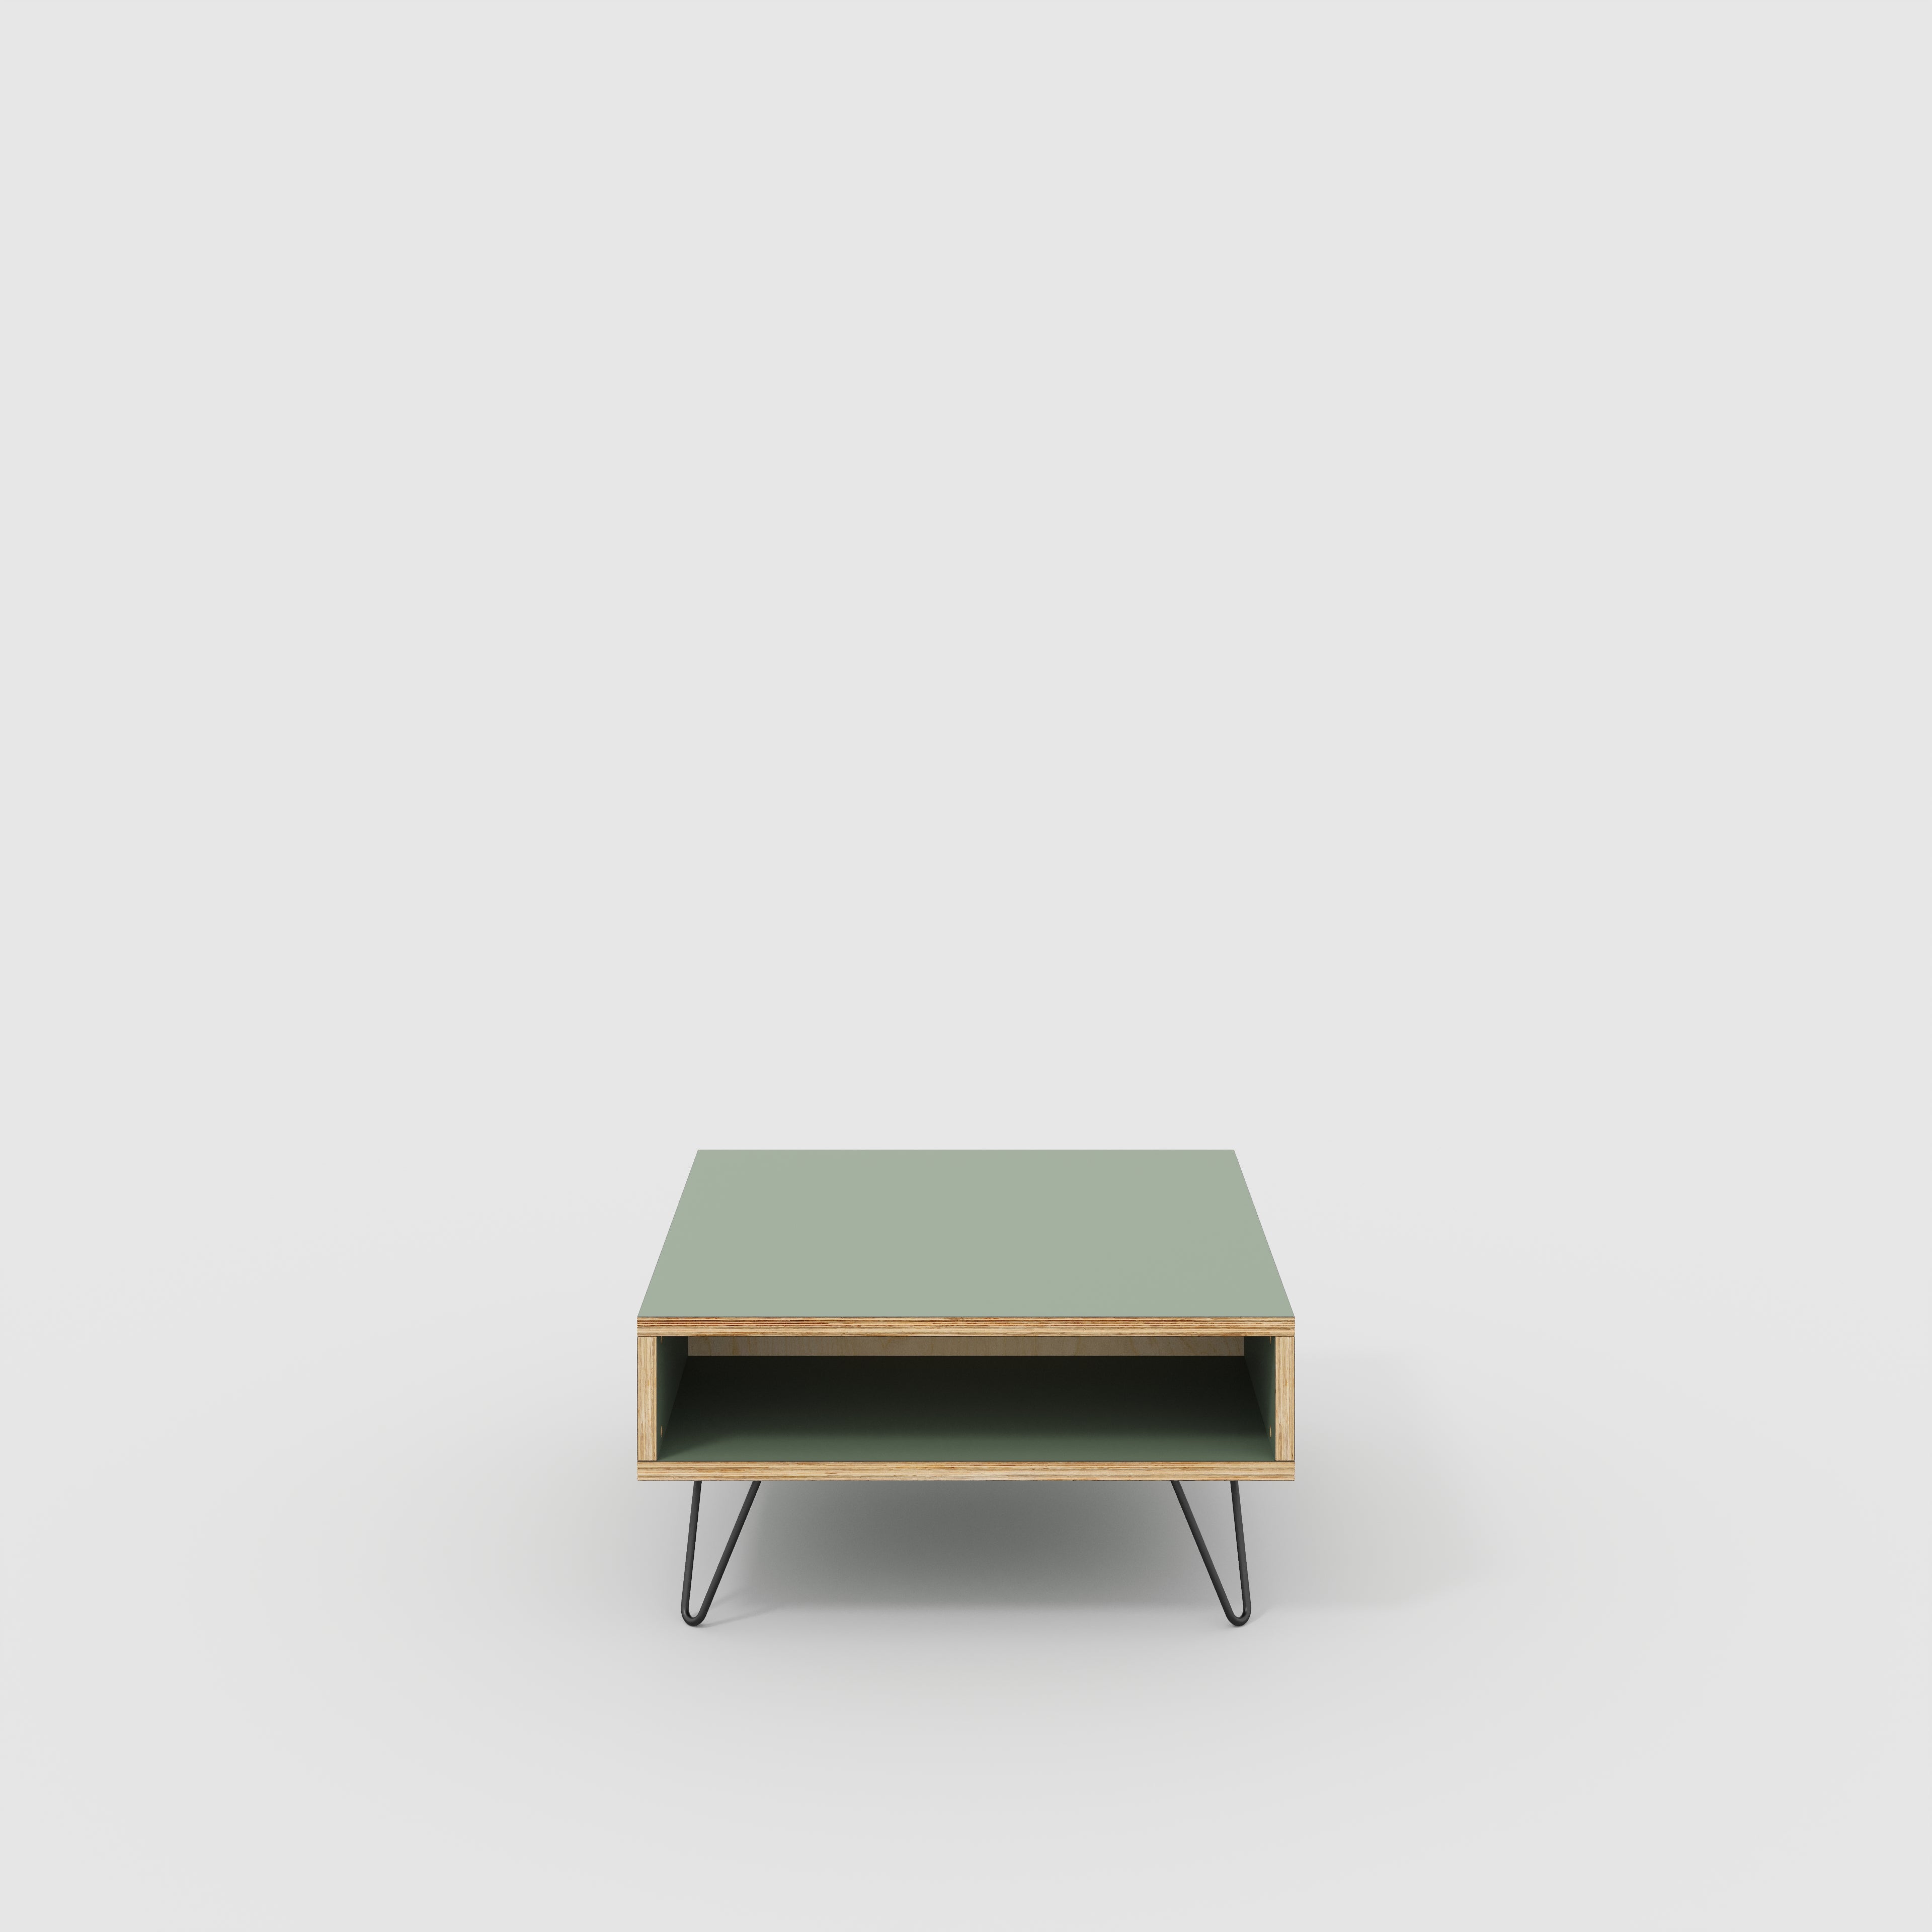 Coffee Table with Box Storage and Black Hairpin Legs - Formica Green Slate - 800(w) x 800(d) x 400(h)